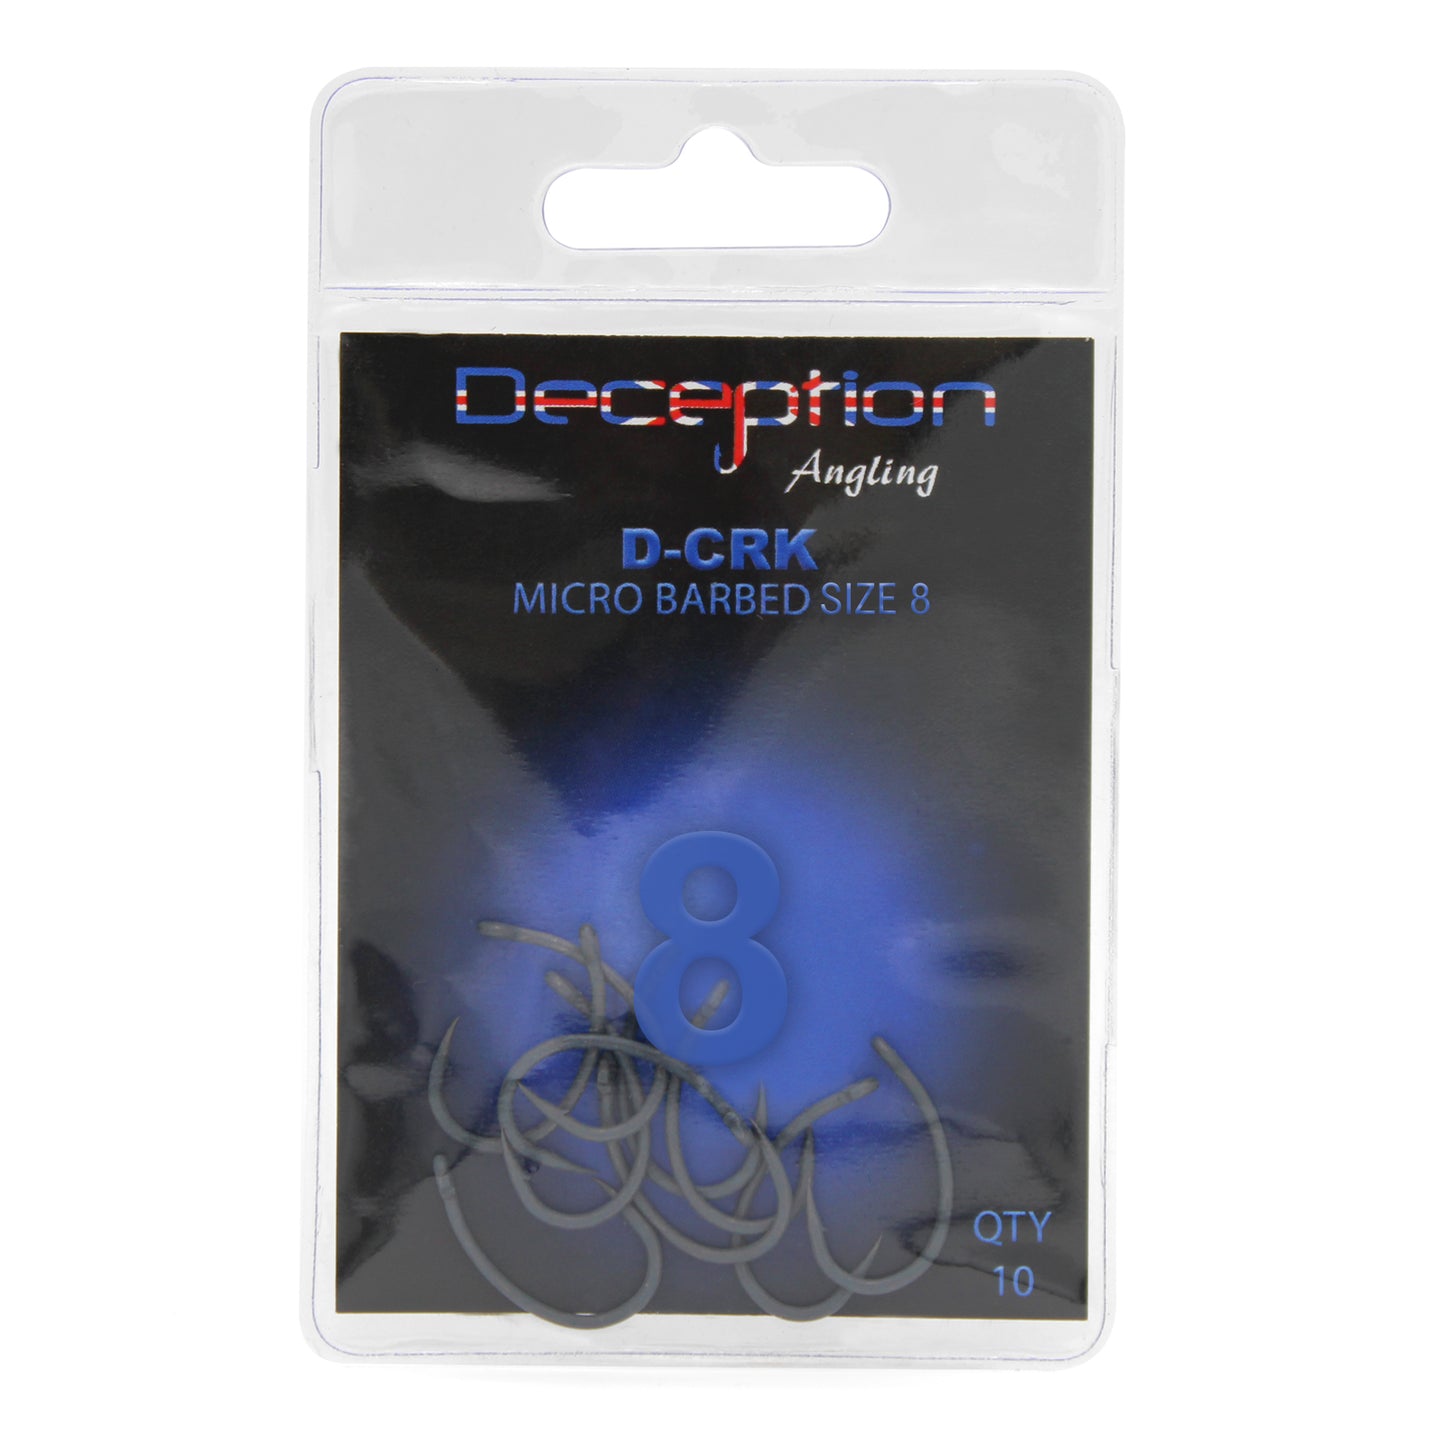 Deception Angling D-CRK Micro Barbed Fishing Hooks Pack of 10 Size 8